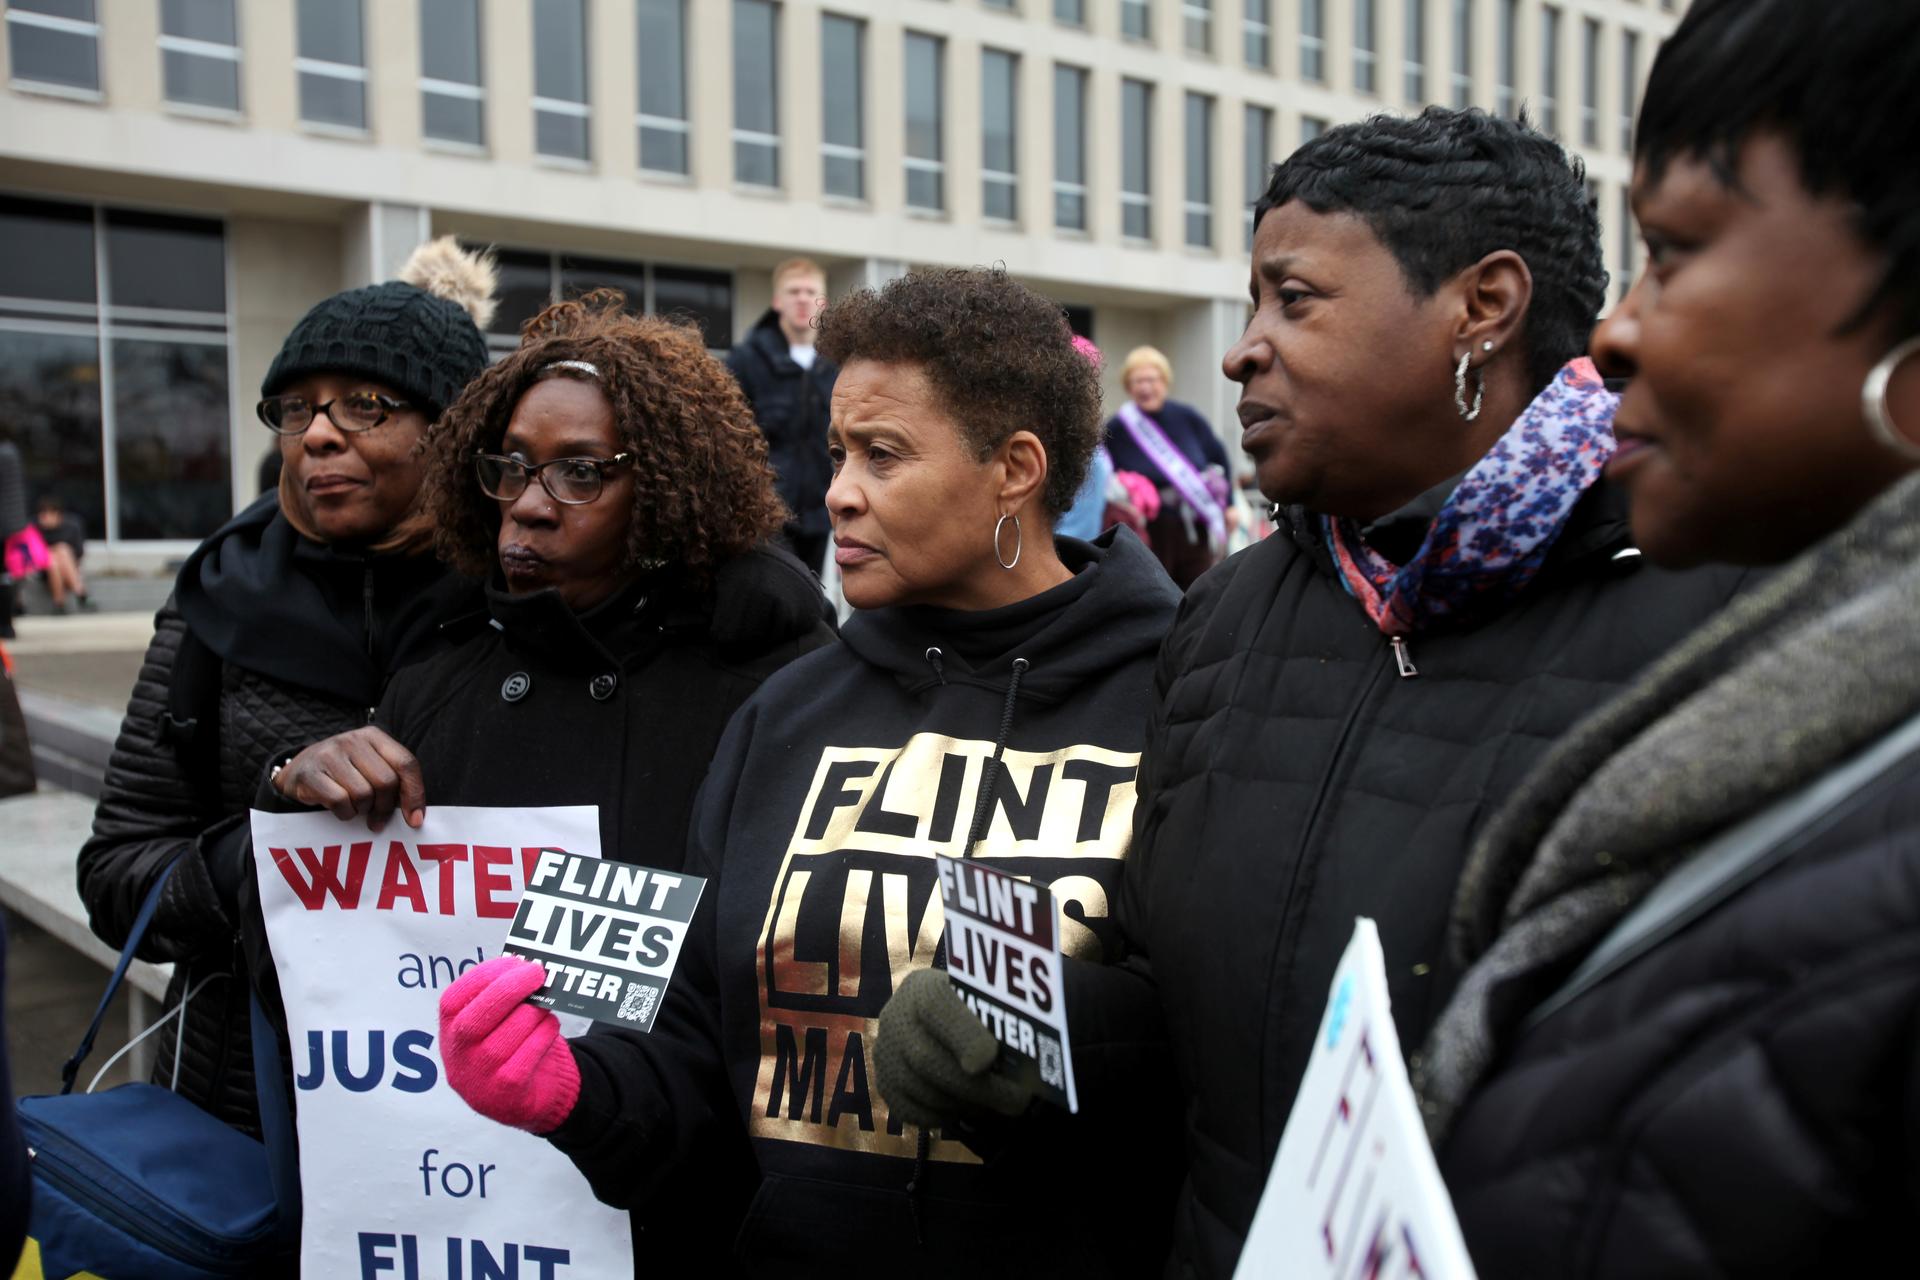 Women who said they chartered a bus from their home in Flint, Michigan, speak to media at the Women's March